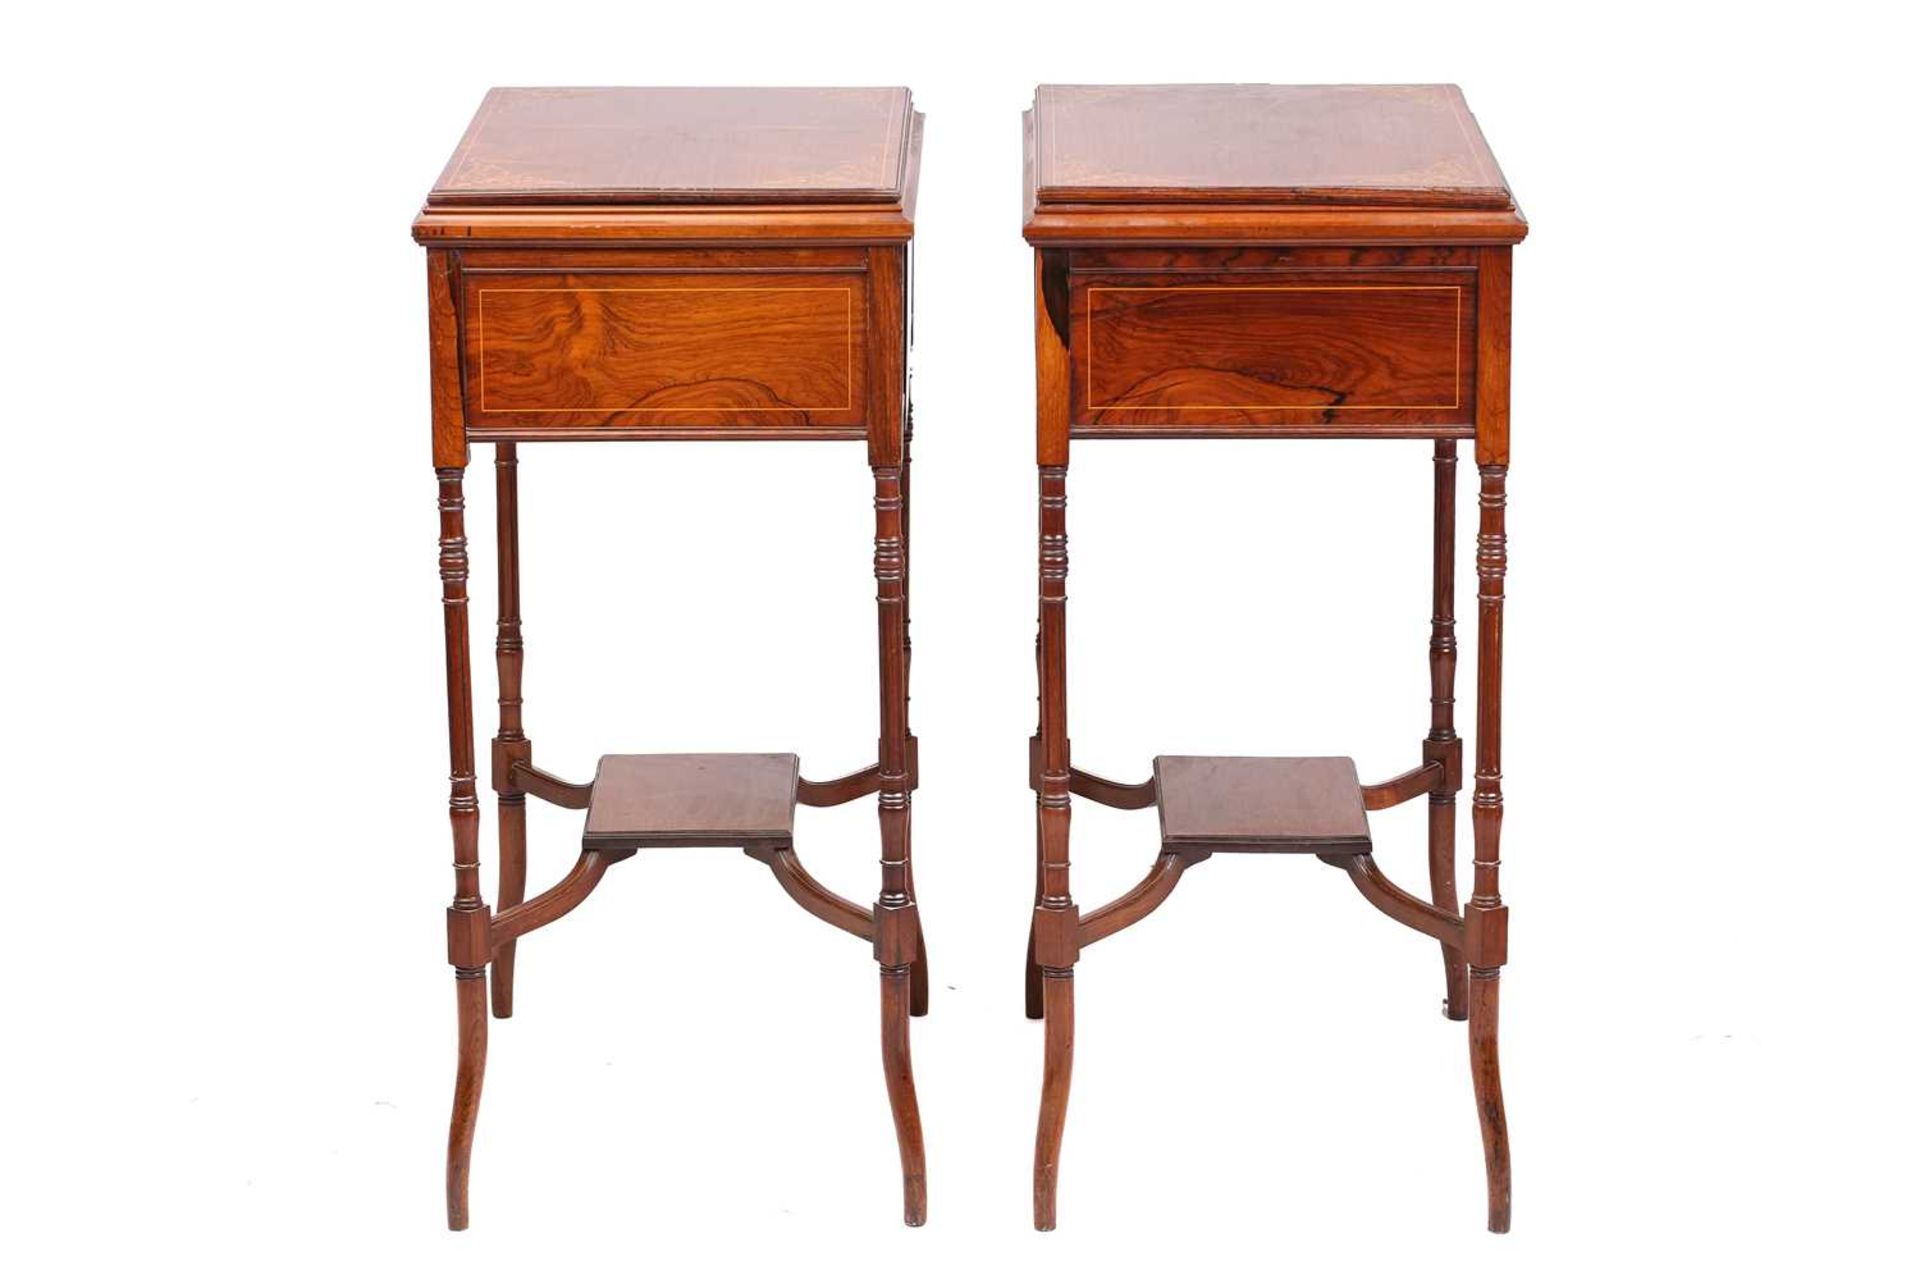 A pair of Edwardian rectangular figured rosewood jardiniere/ wine cooler tables, possibly by Edwards - Image 6 of 16